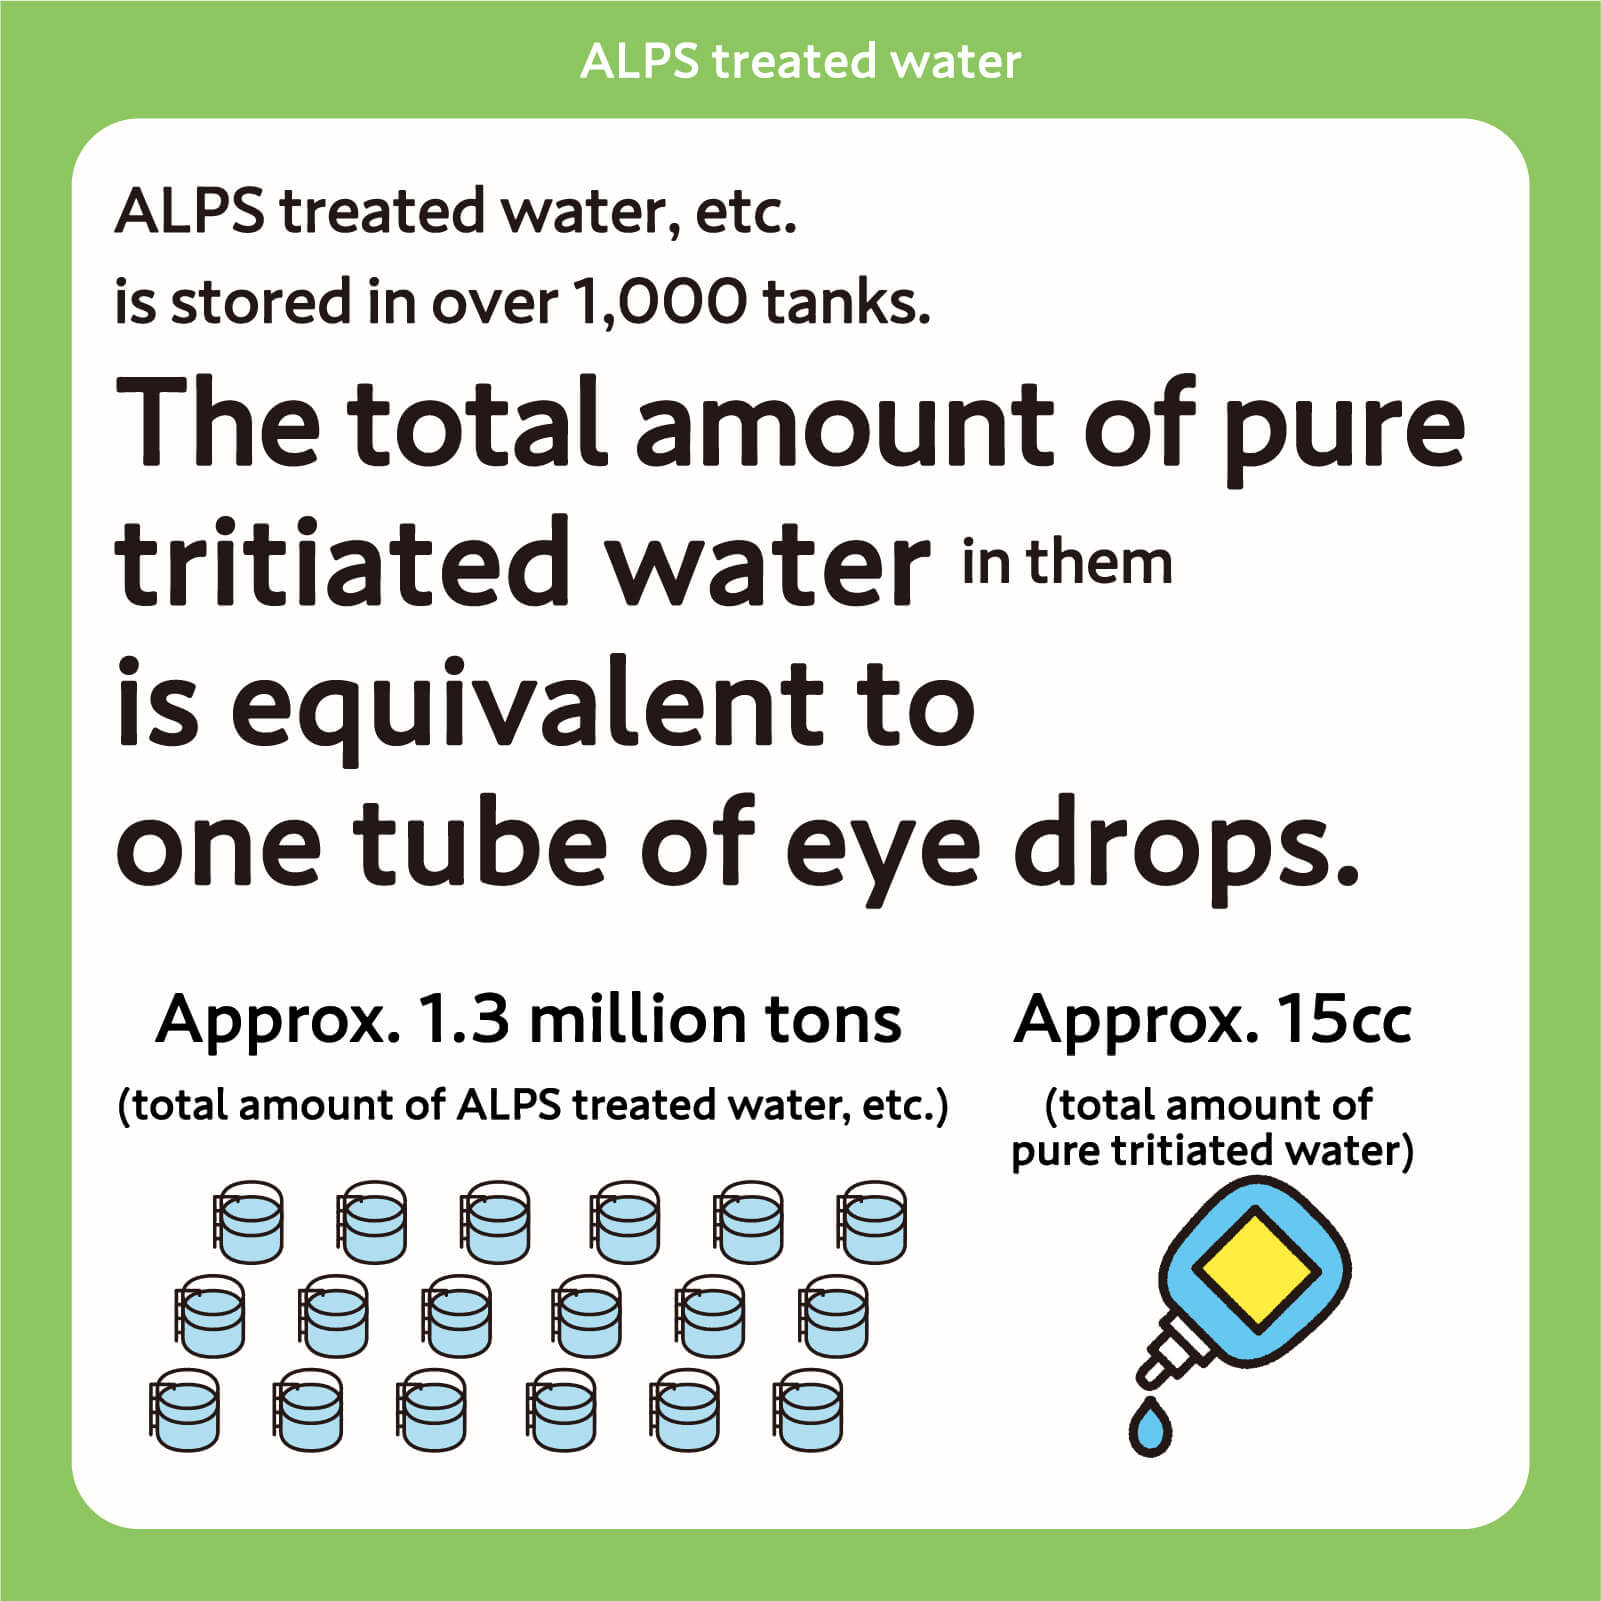 ALPS treated water, etc. is stored in over 1,000 tanks. The total amount of pure tritiated water in them is equivalent to one tube of eye drops.